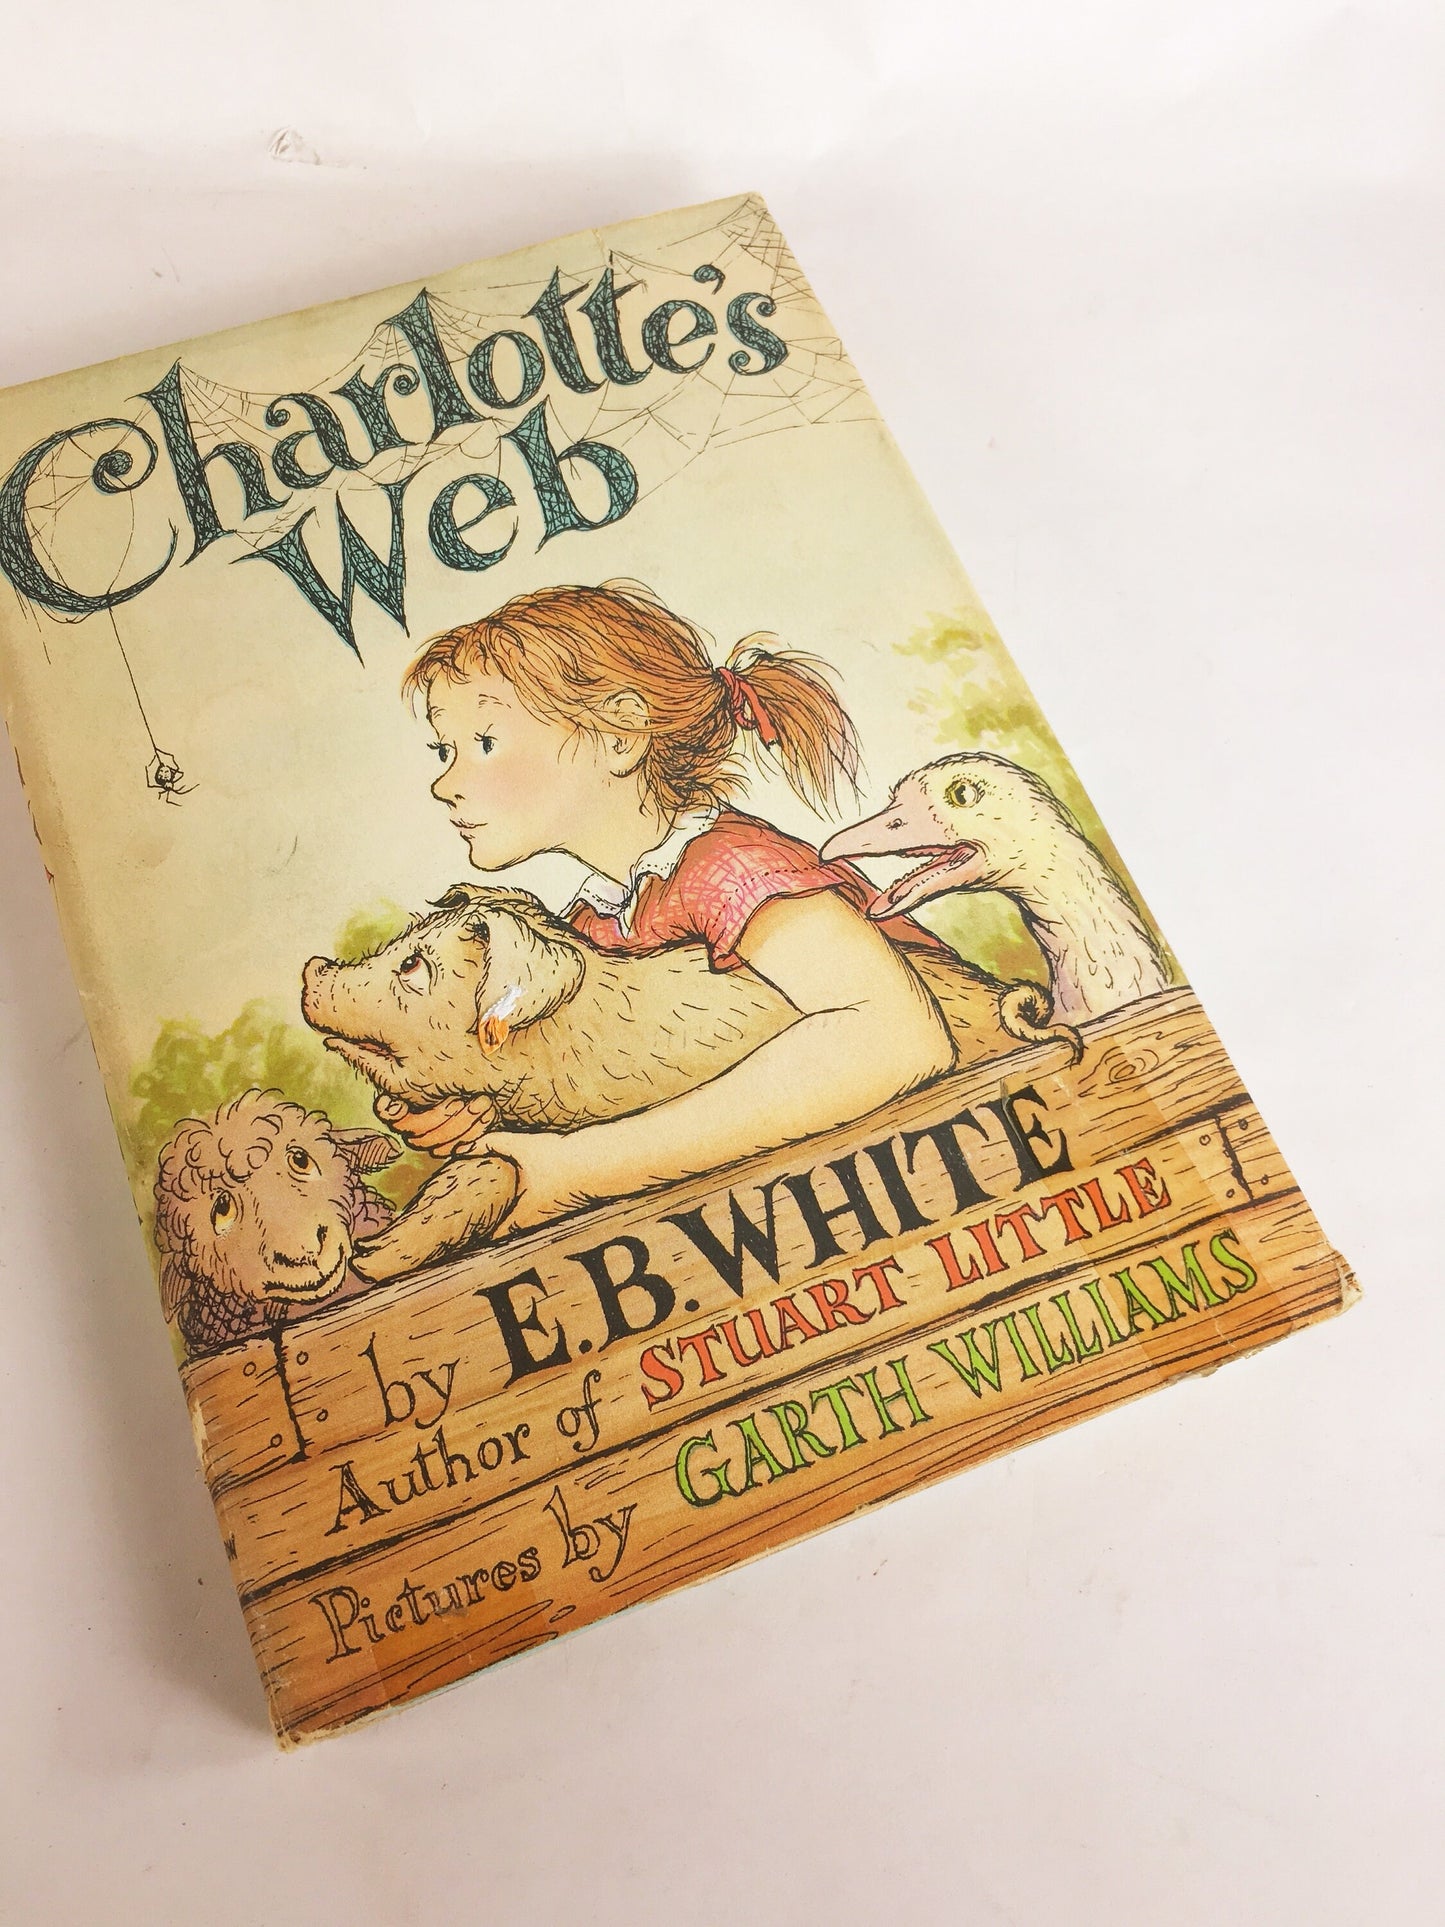 Charlotte's Web by EB White. EARLY PRINTING illustrator Garth Williams. Collector vintage book gift circa 1970.